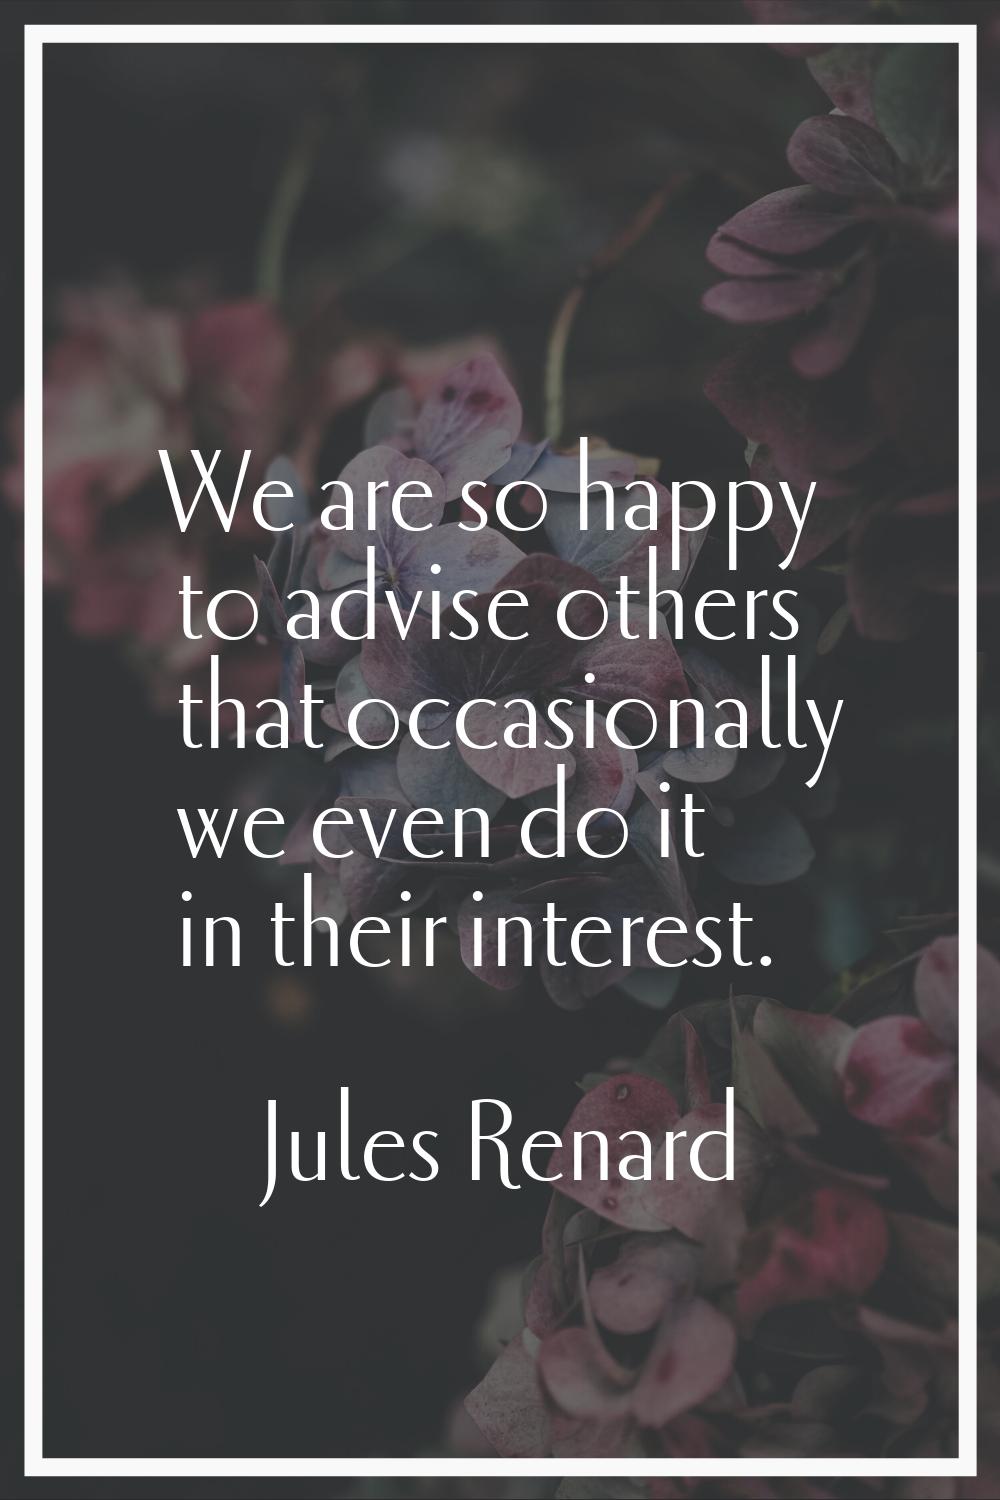 We are so happy to advise others that occasionally we even do it in their interest.